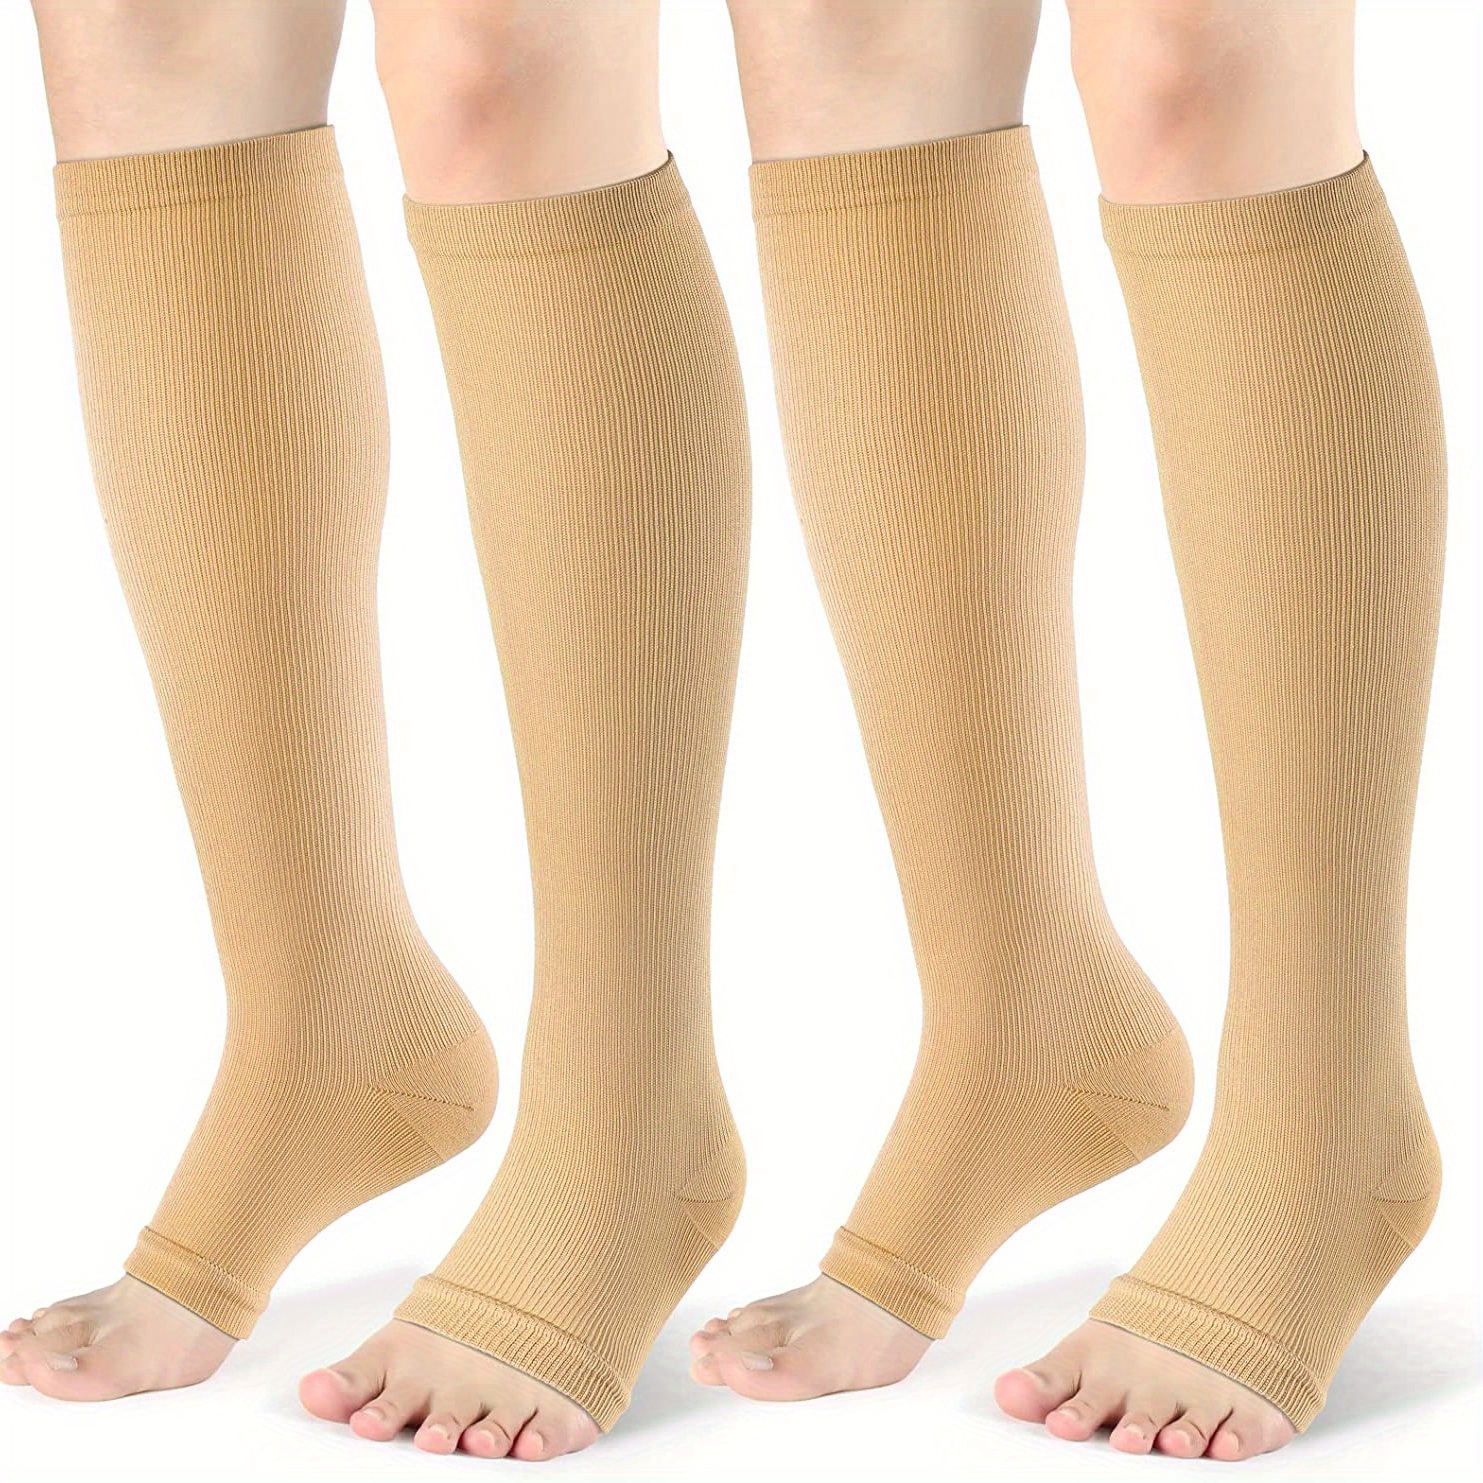  Compression Support Stockings, Soft Varicose Vein